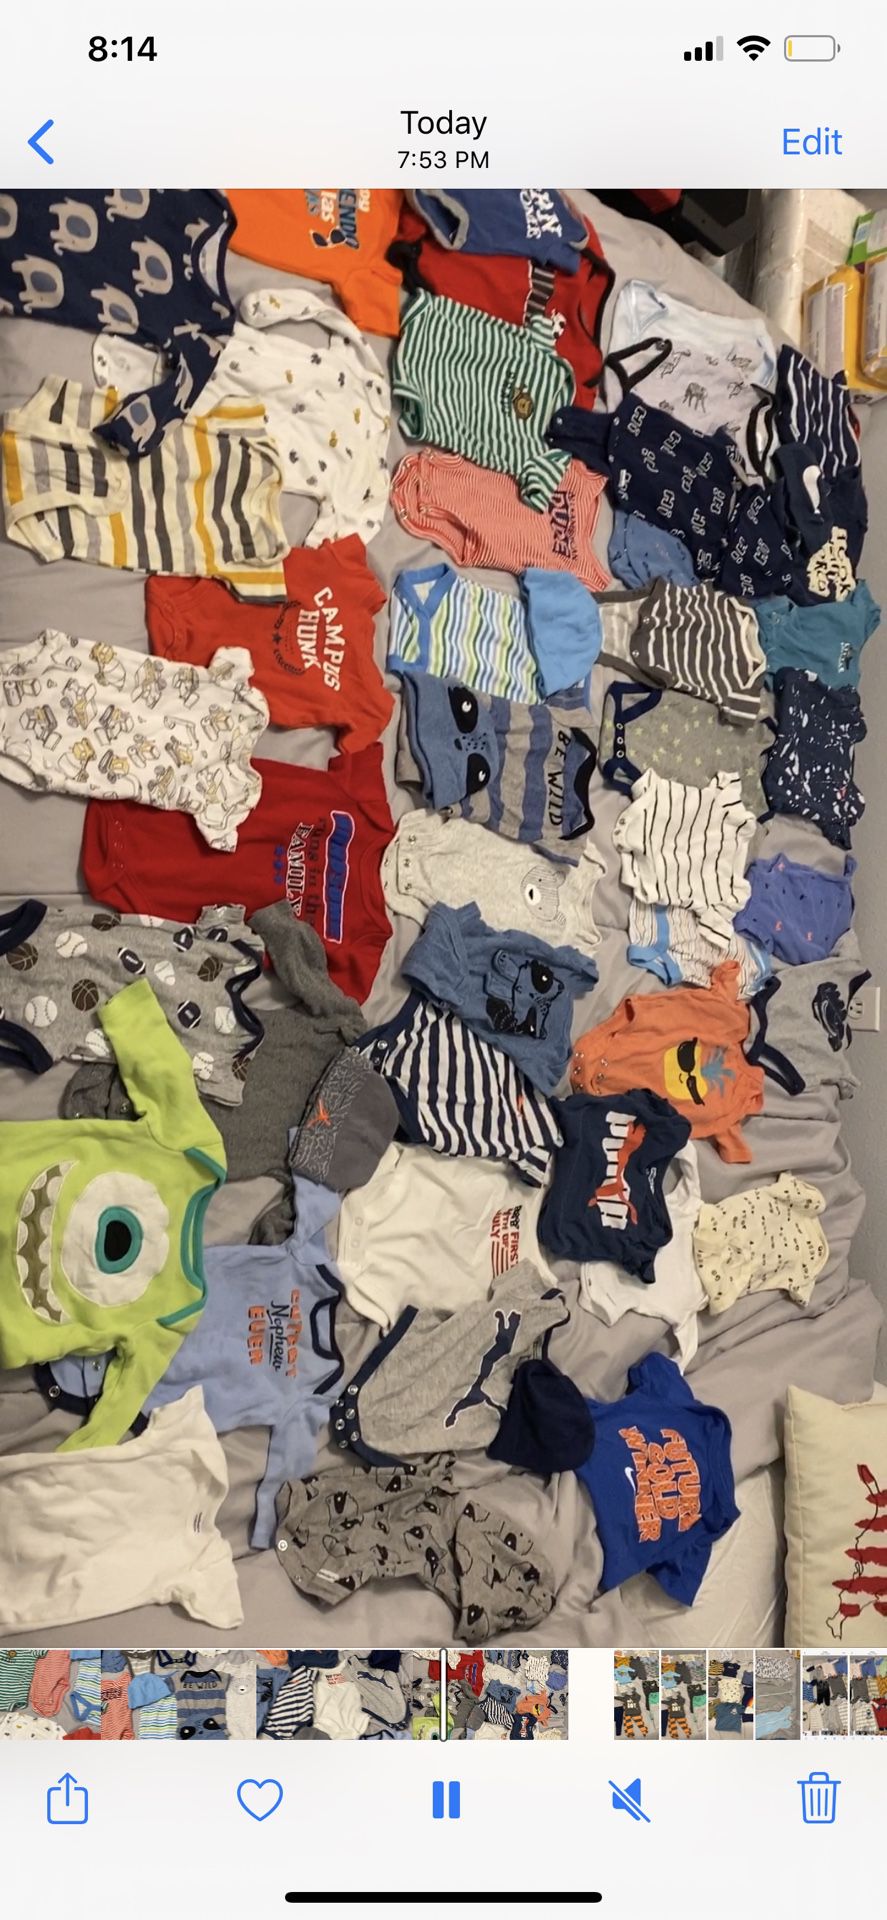 Baby clothes newborn and 0-3 months tonss of diapers formula and more clothes